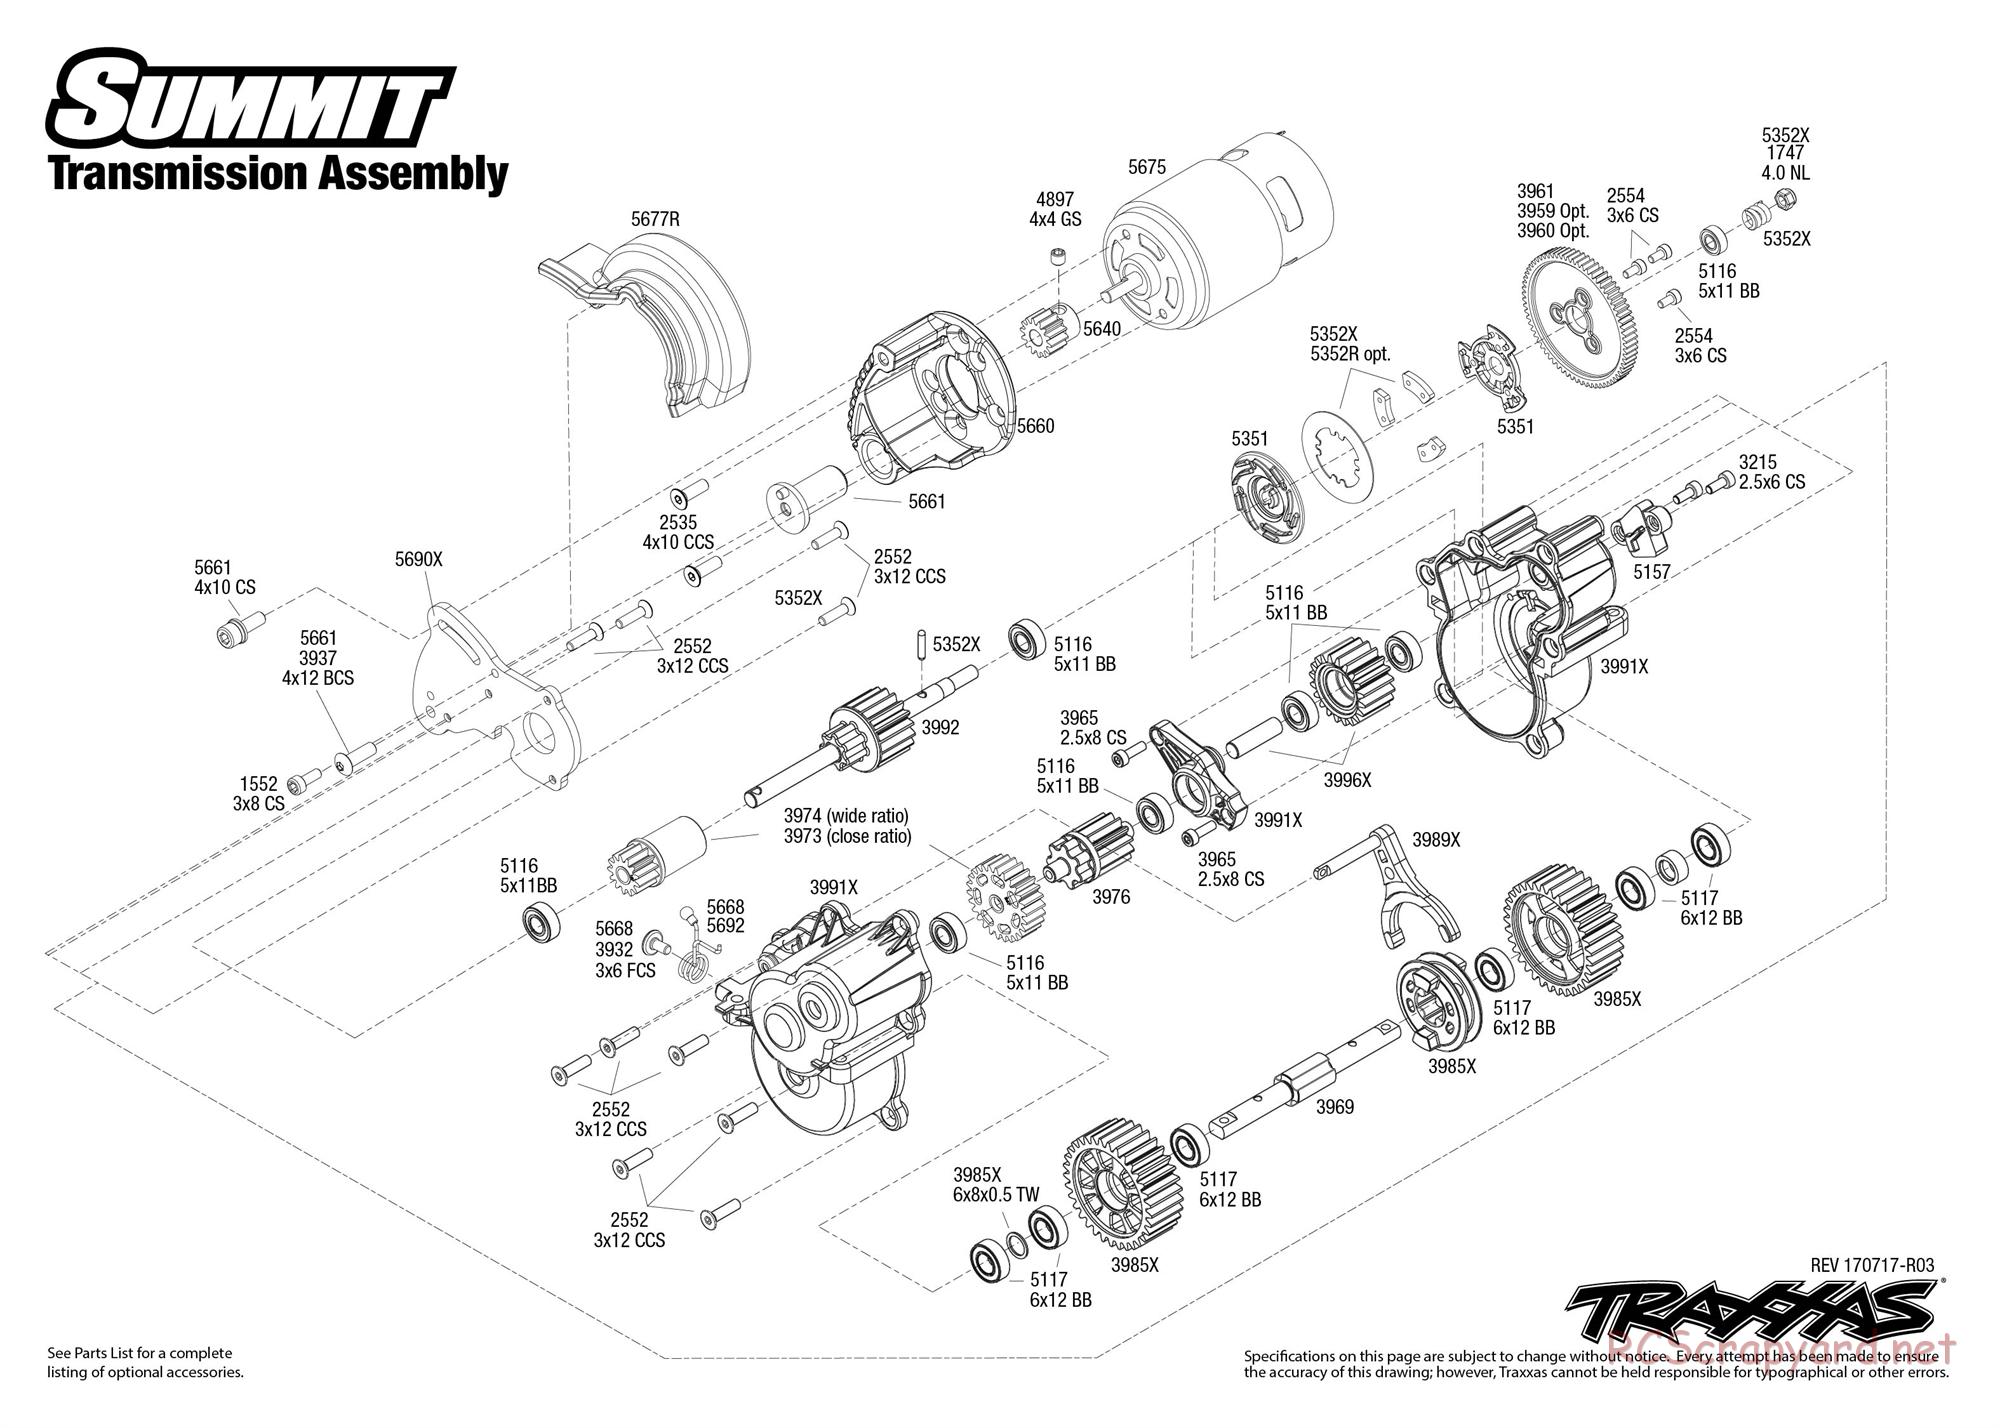 Traxxas - Summit (2015) - Exploded Views - Page 5